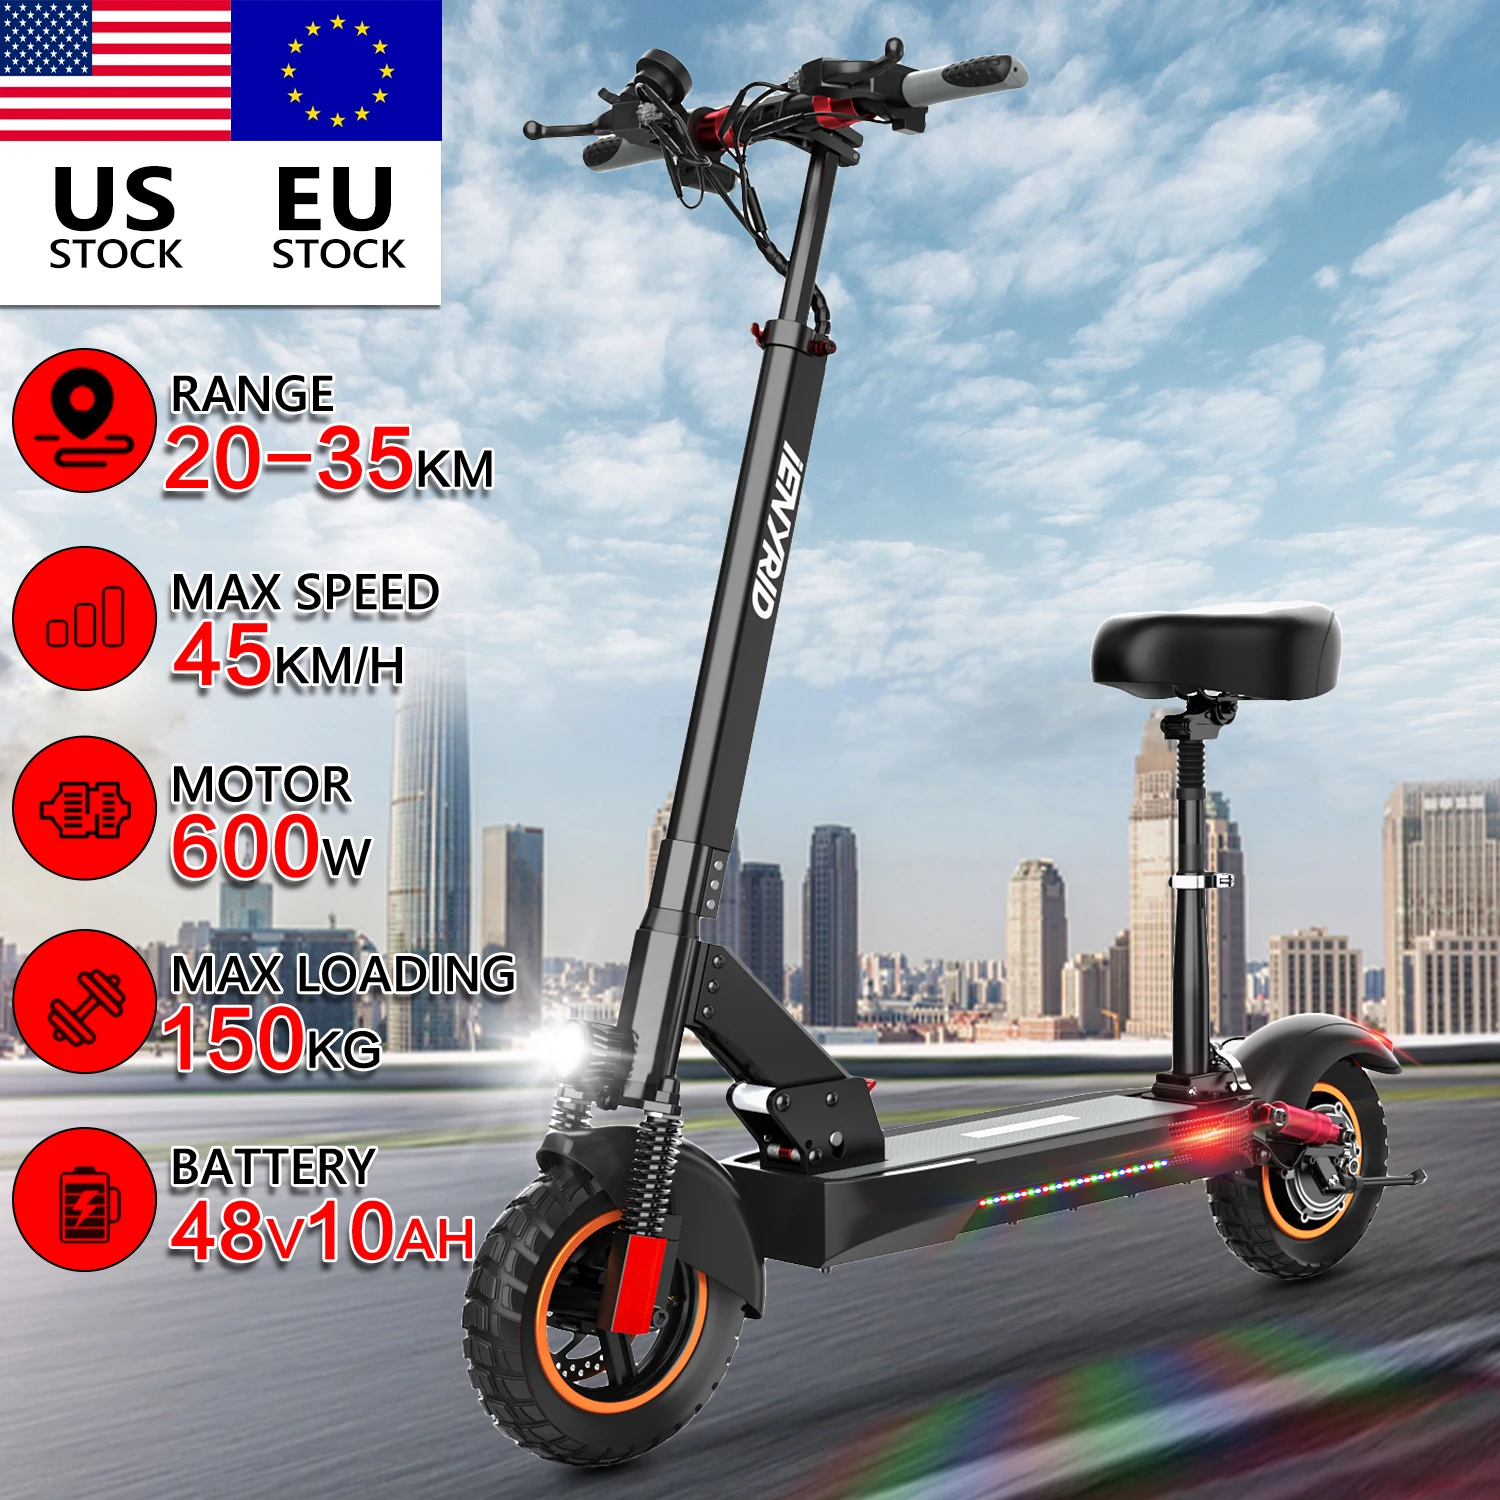 

EU UK Oversea Warehouse Faster Delivery IENYRID M4 PRO S 16ah 500w 10ah 600w Motor Scooters Foldable Electric Scooter Kugoo